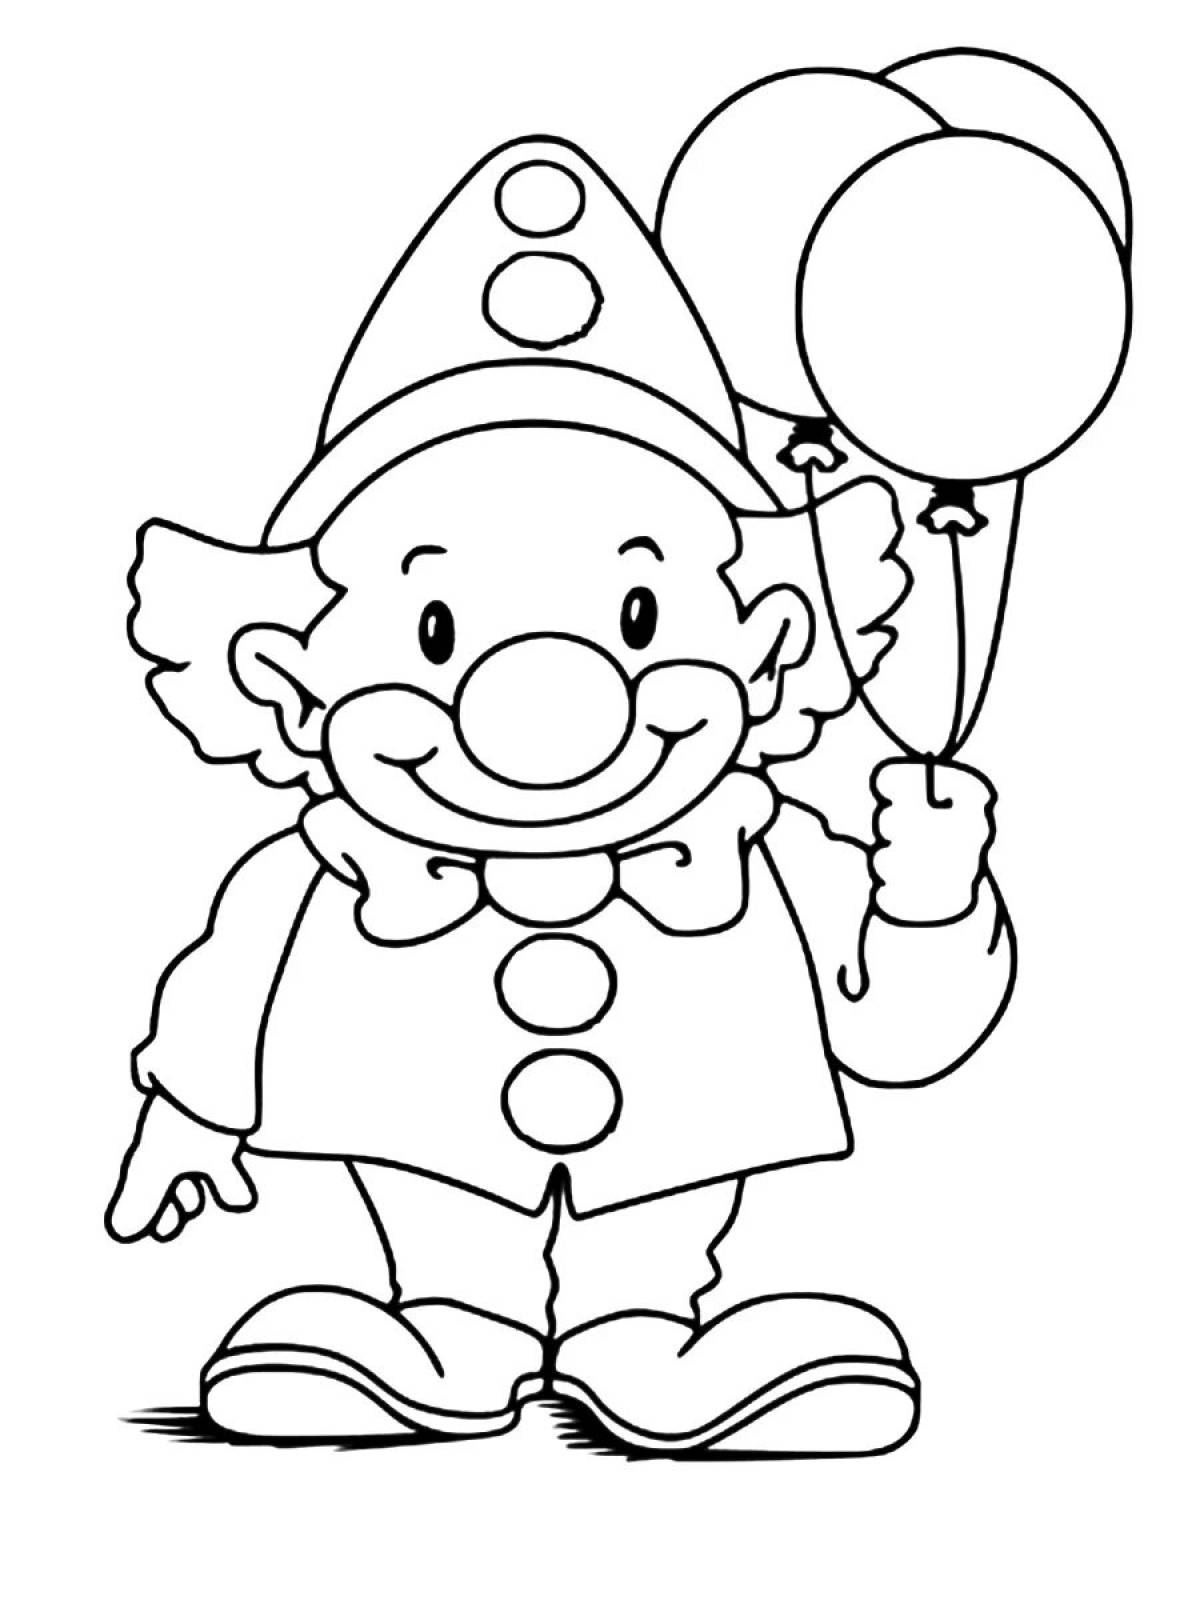 Clown drawing for kids for #1